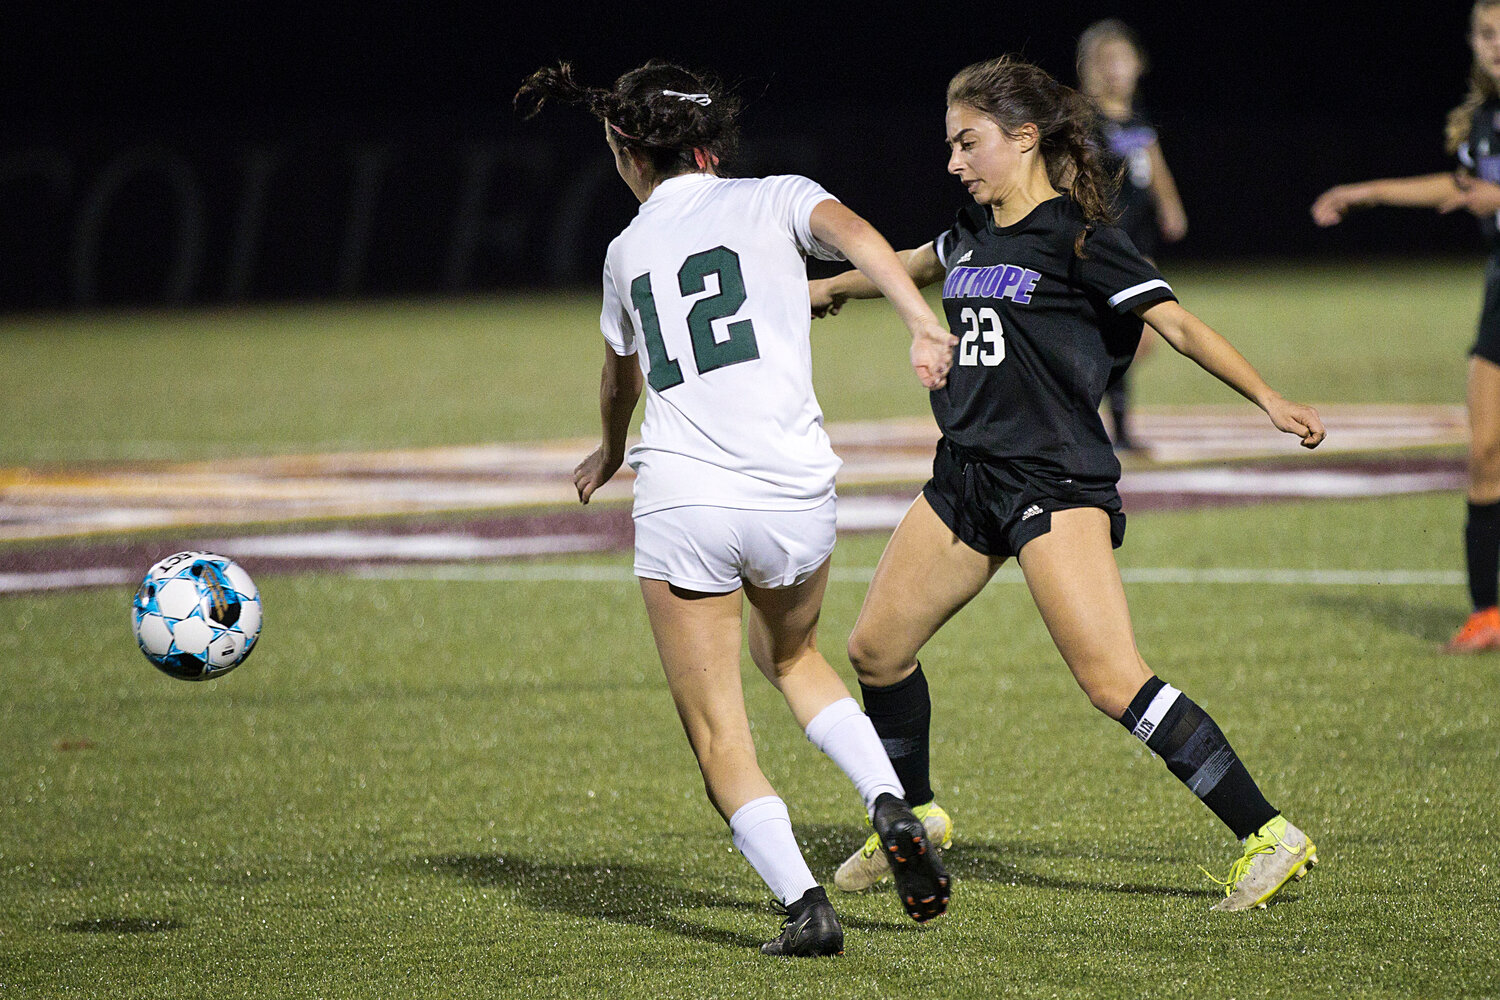 Hannah Rezendes boots the ball away from a Chariho opponent.